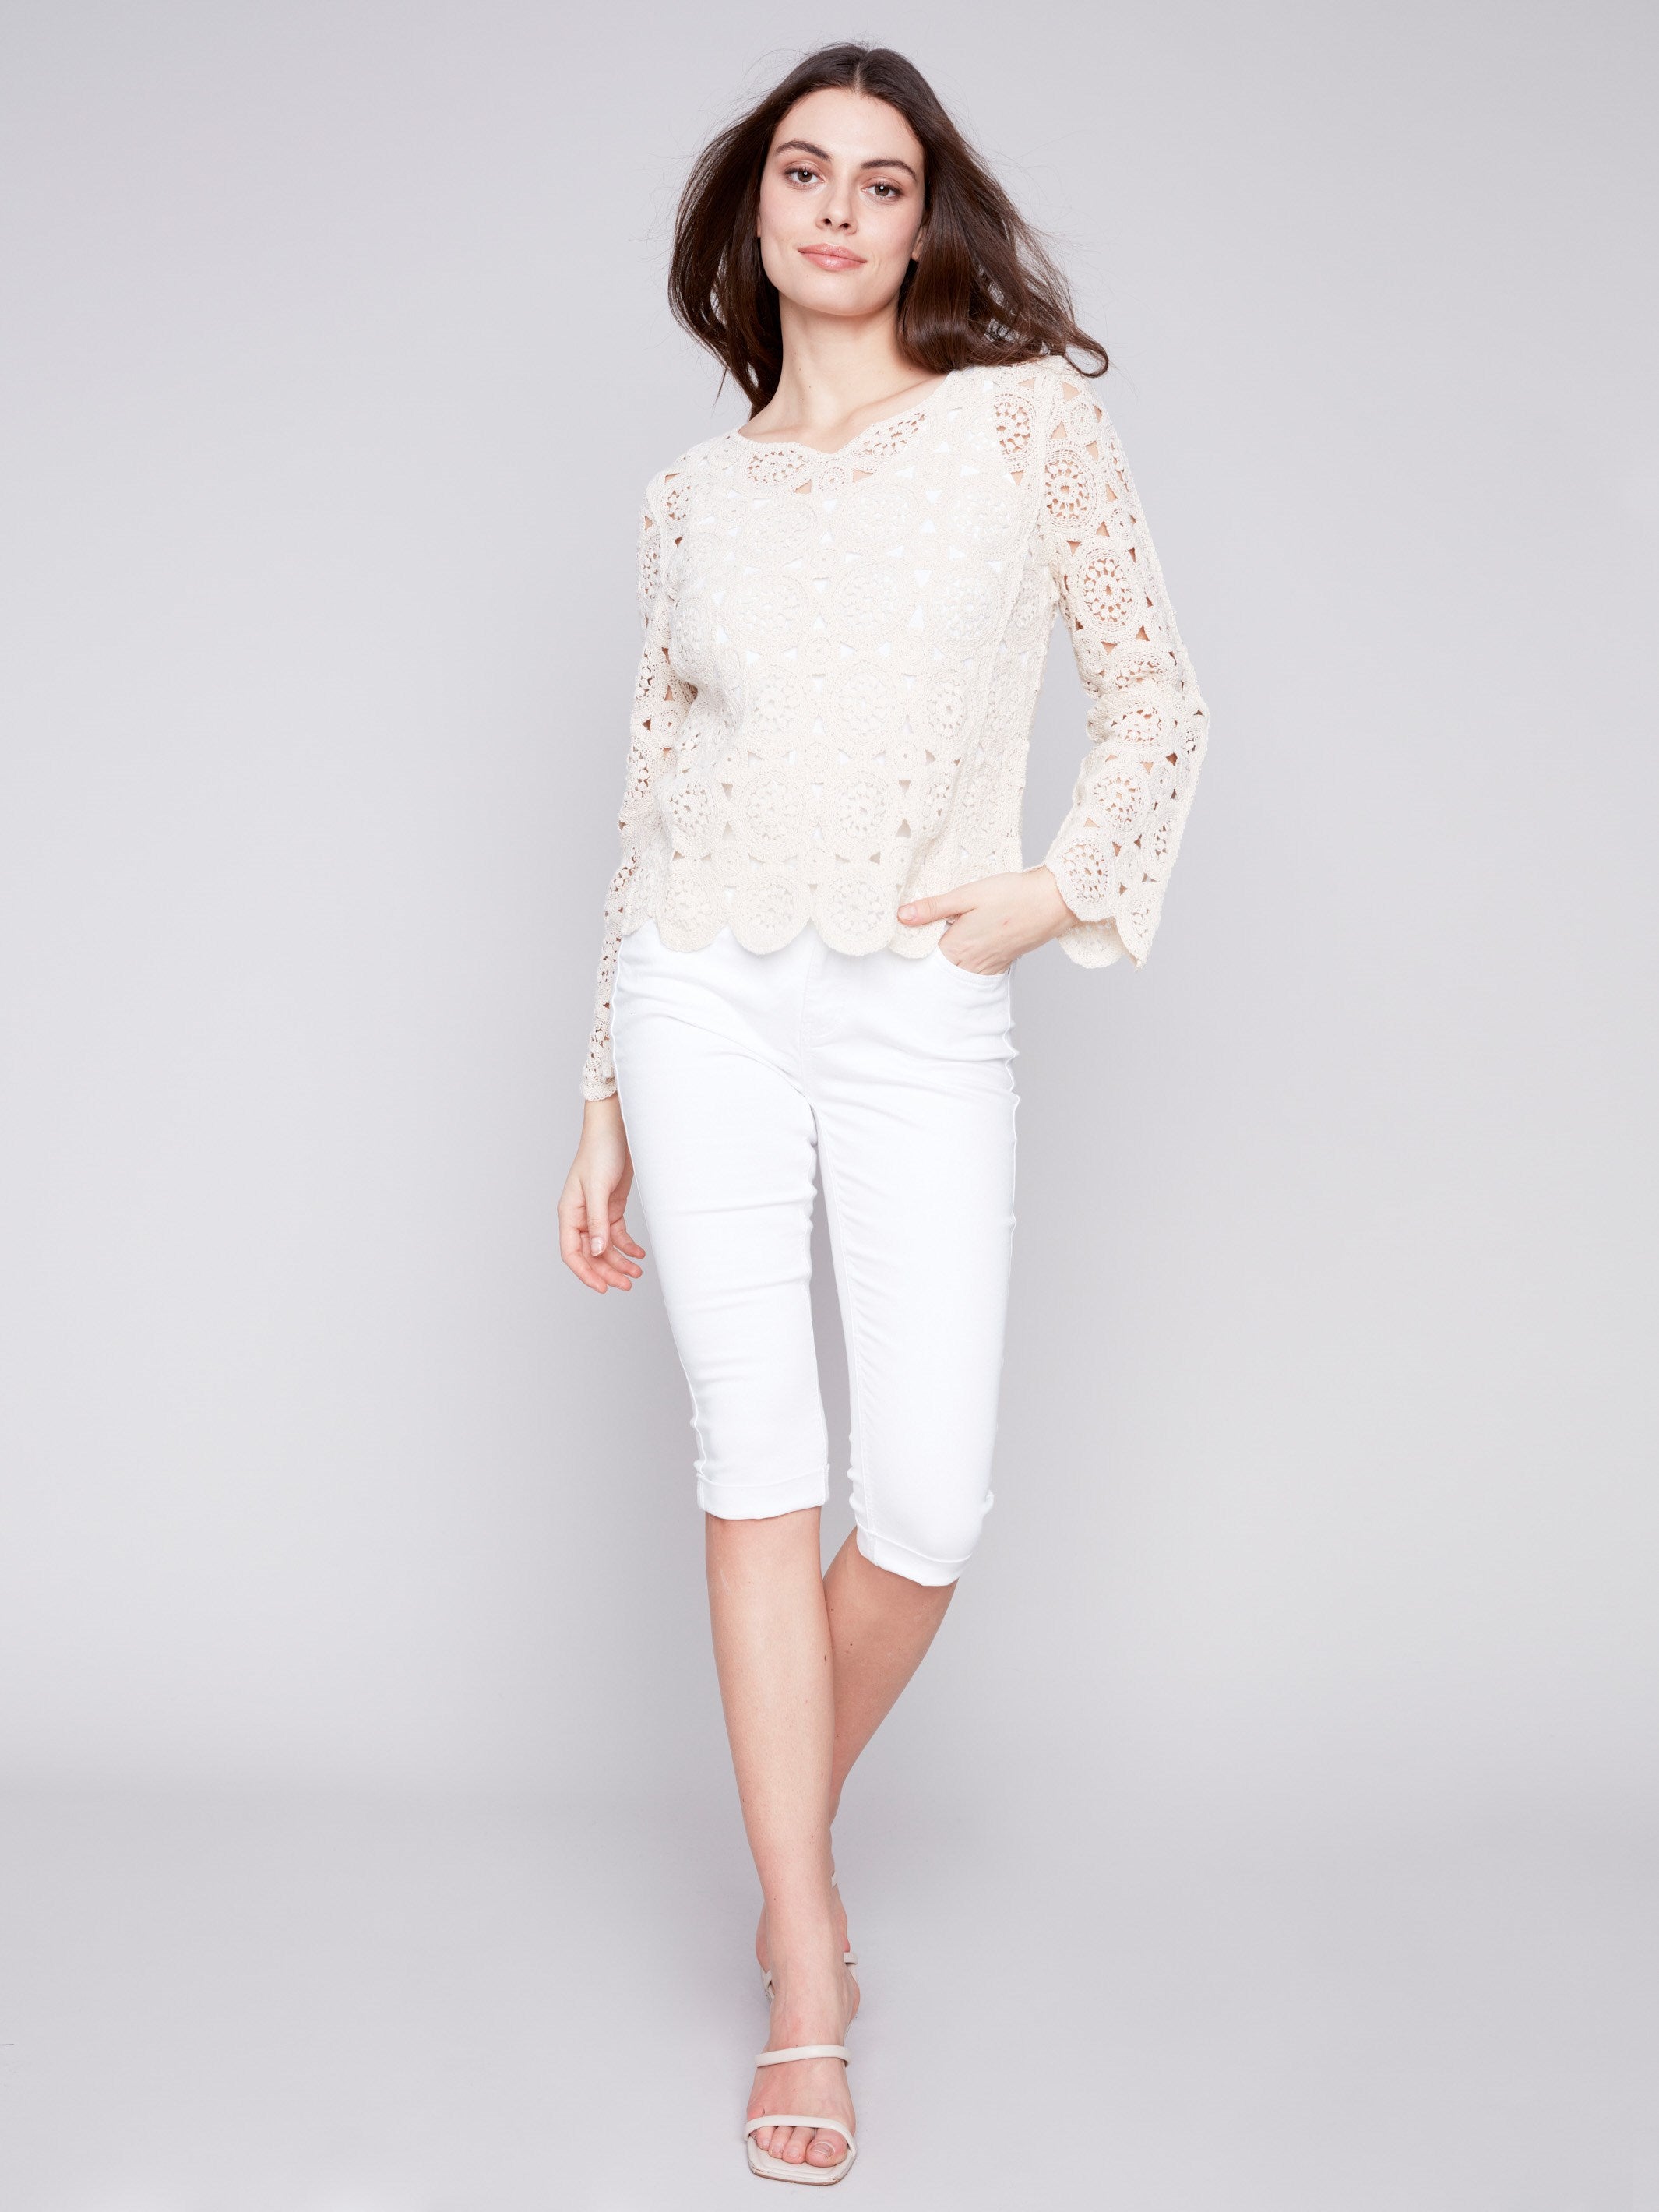 Scalloped Crochet Top - Natural - Charlie B Collection Canada - Image 2